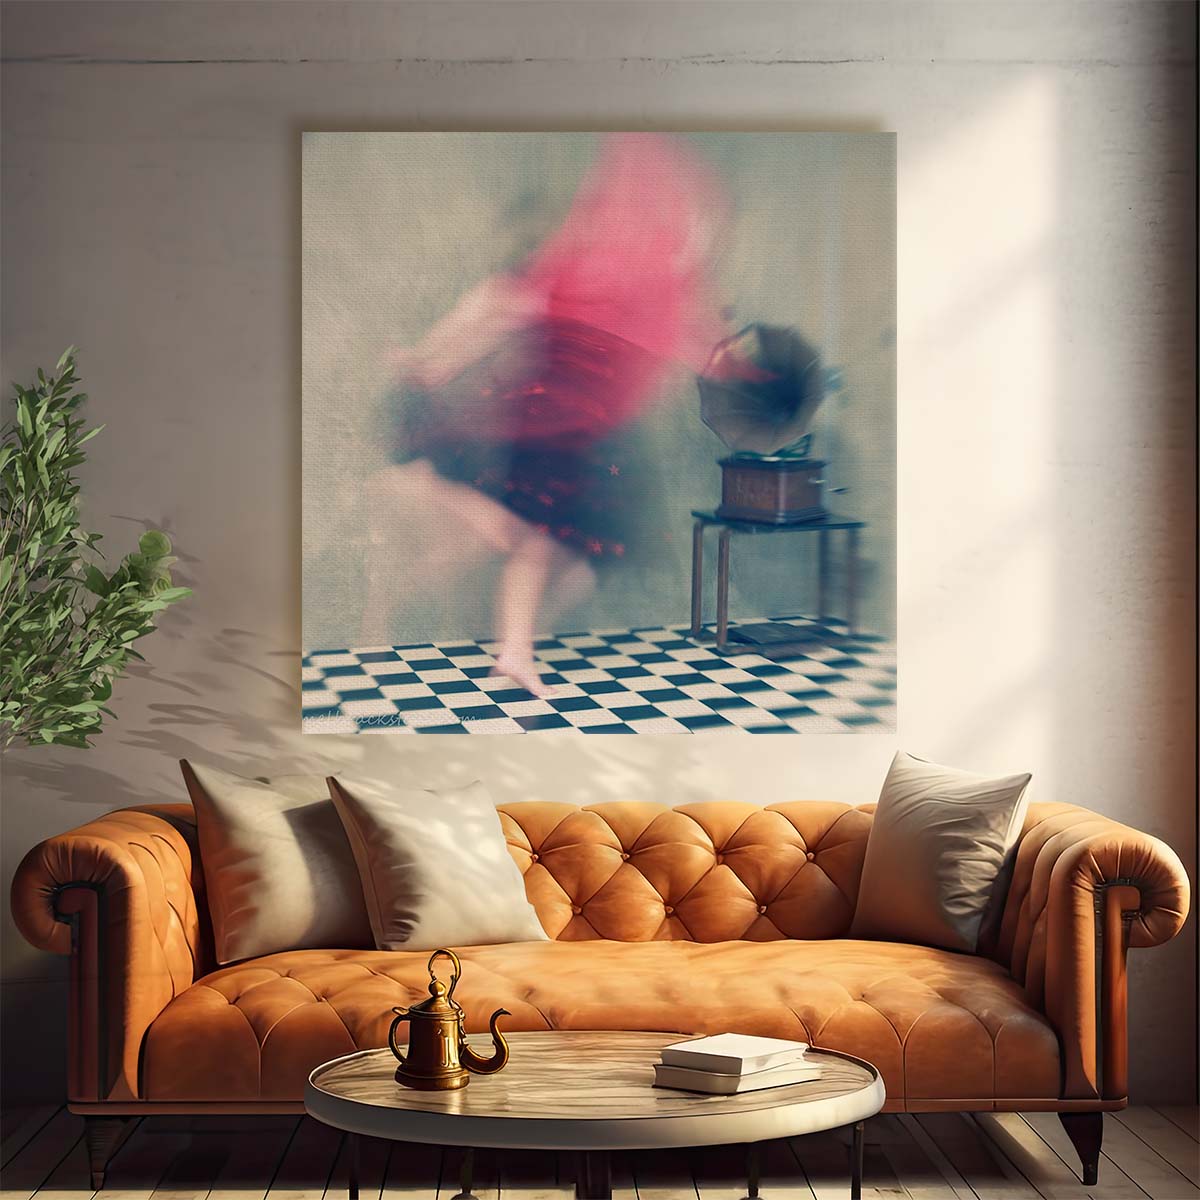 Nostalgic Romance in Motion Vintage Dancing Woman Photography Wall Art by Luxuriance Designs. Made in USA.